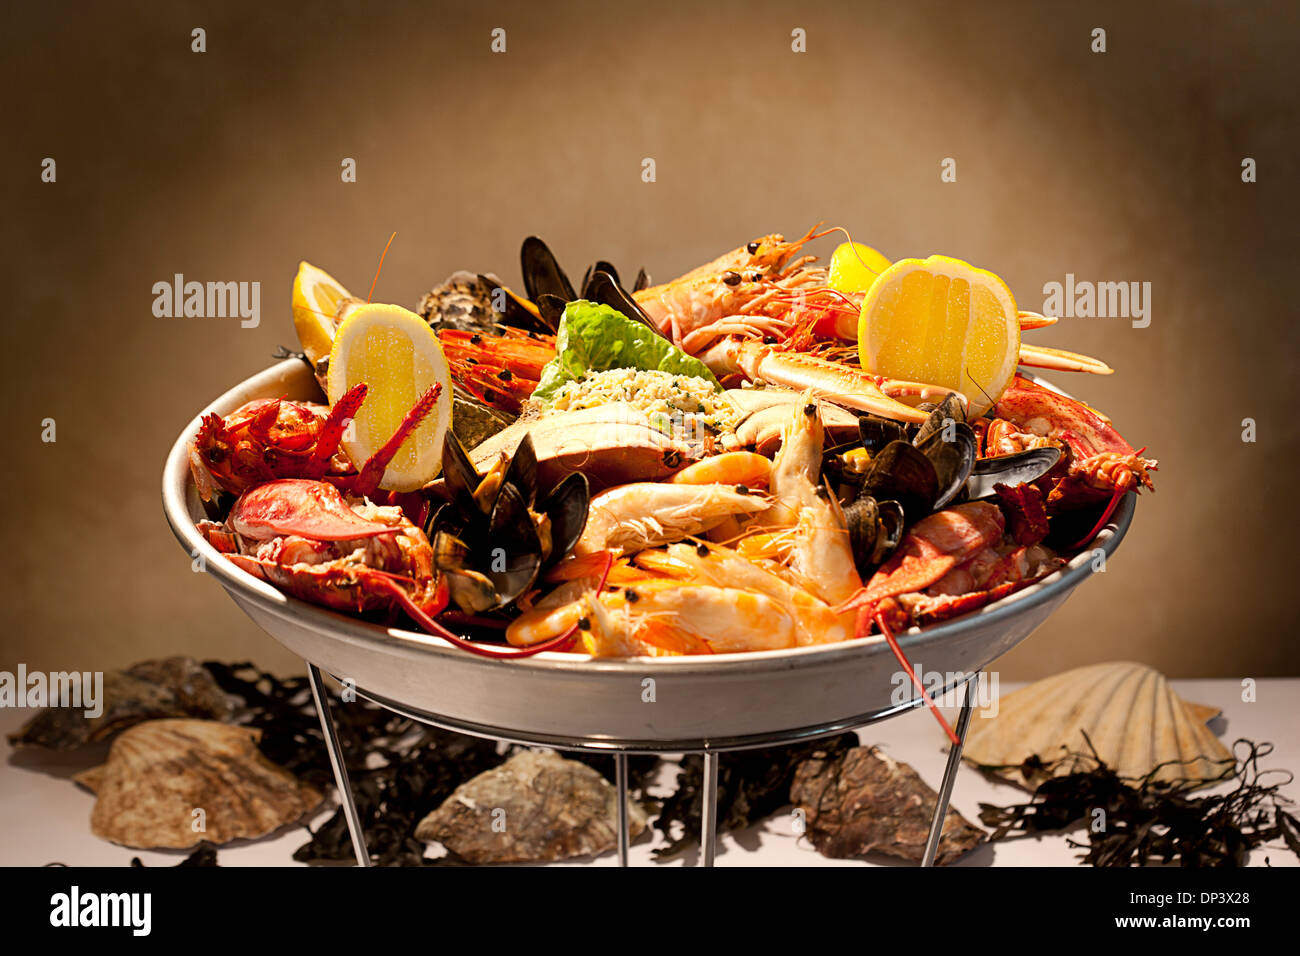 Variety of Seafood on Serving Plate, Studio Shot Stock Photo